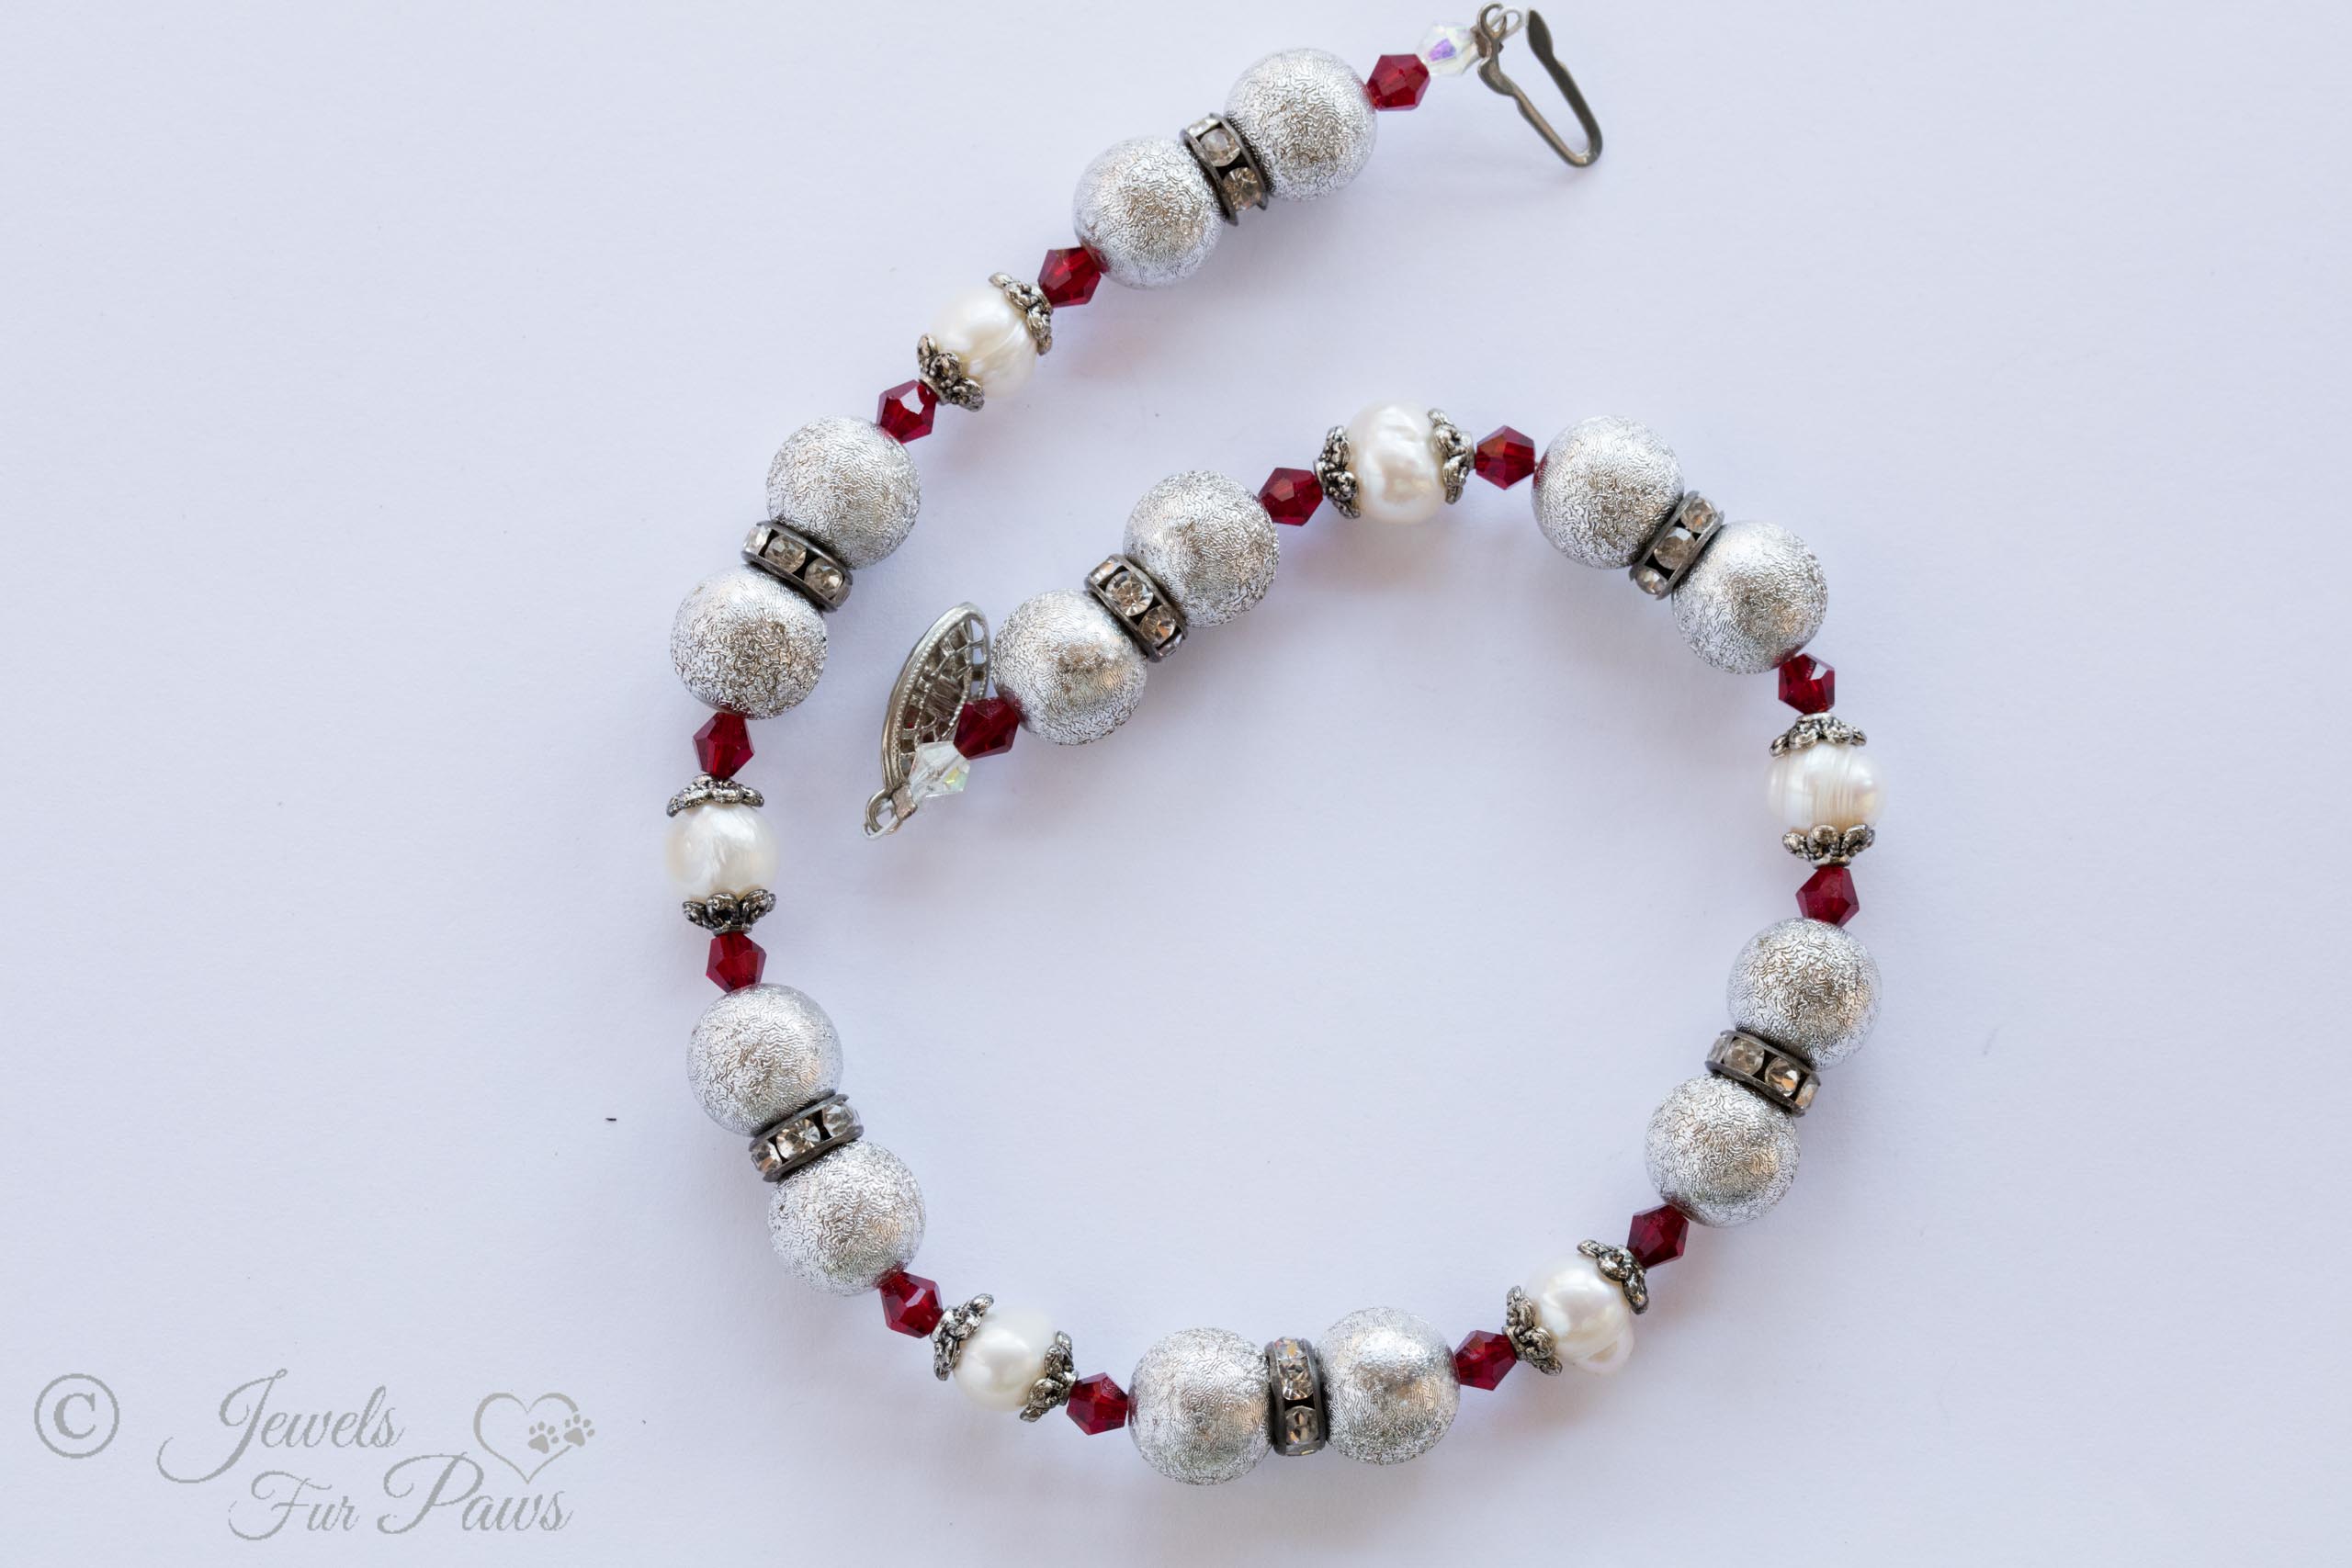 small cat dog pet necklace jewelry with hammered silver beads, cultured pearls silver spacers and red czech crystal spacers on white background